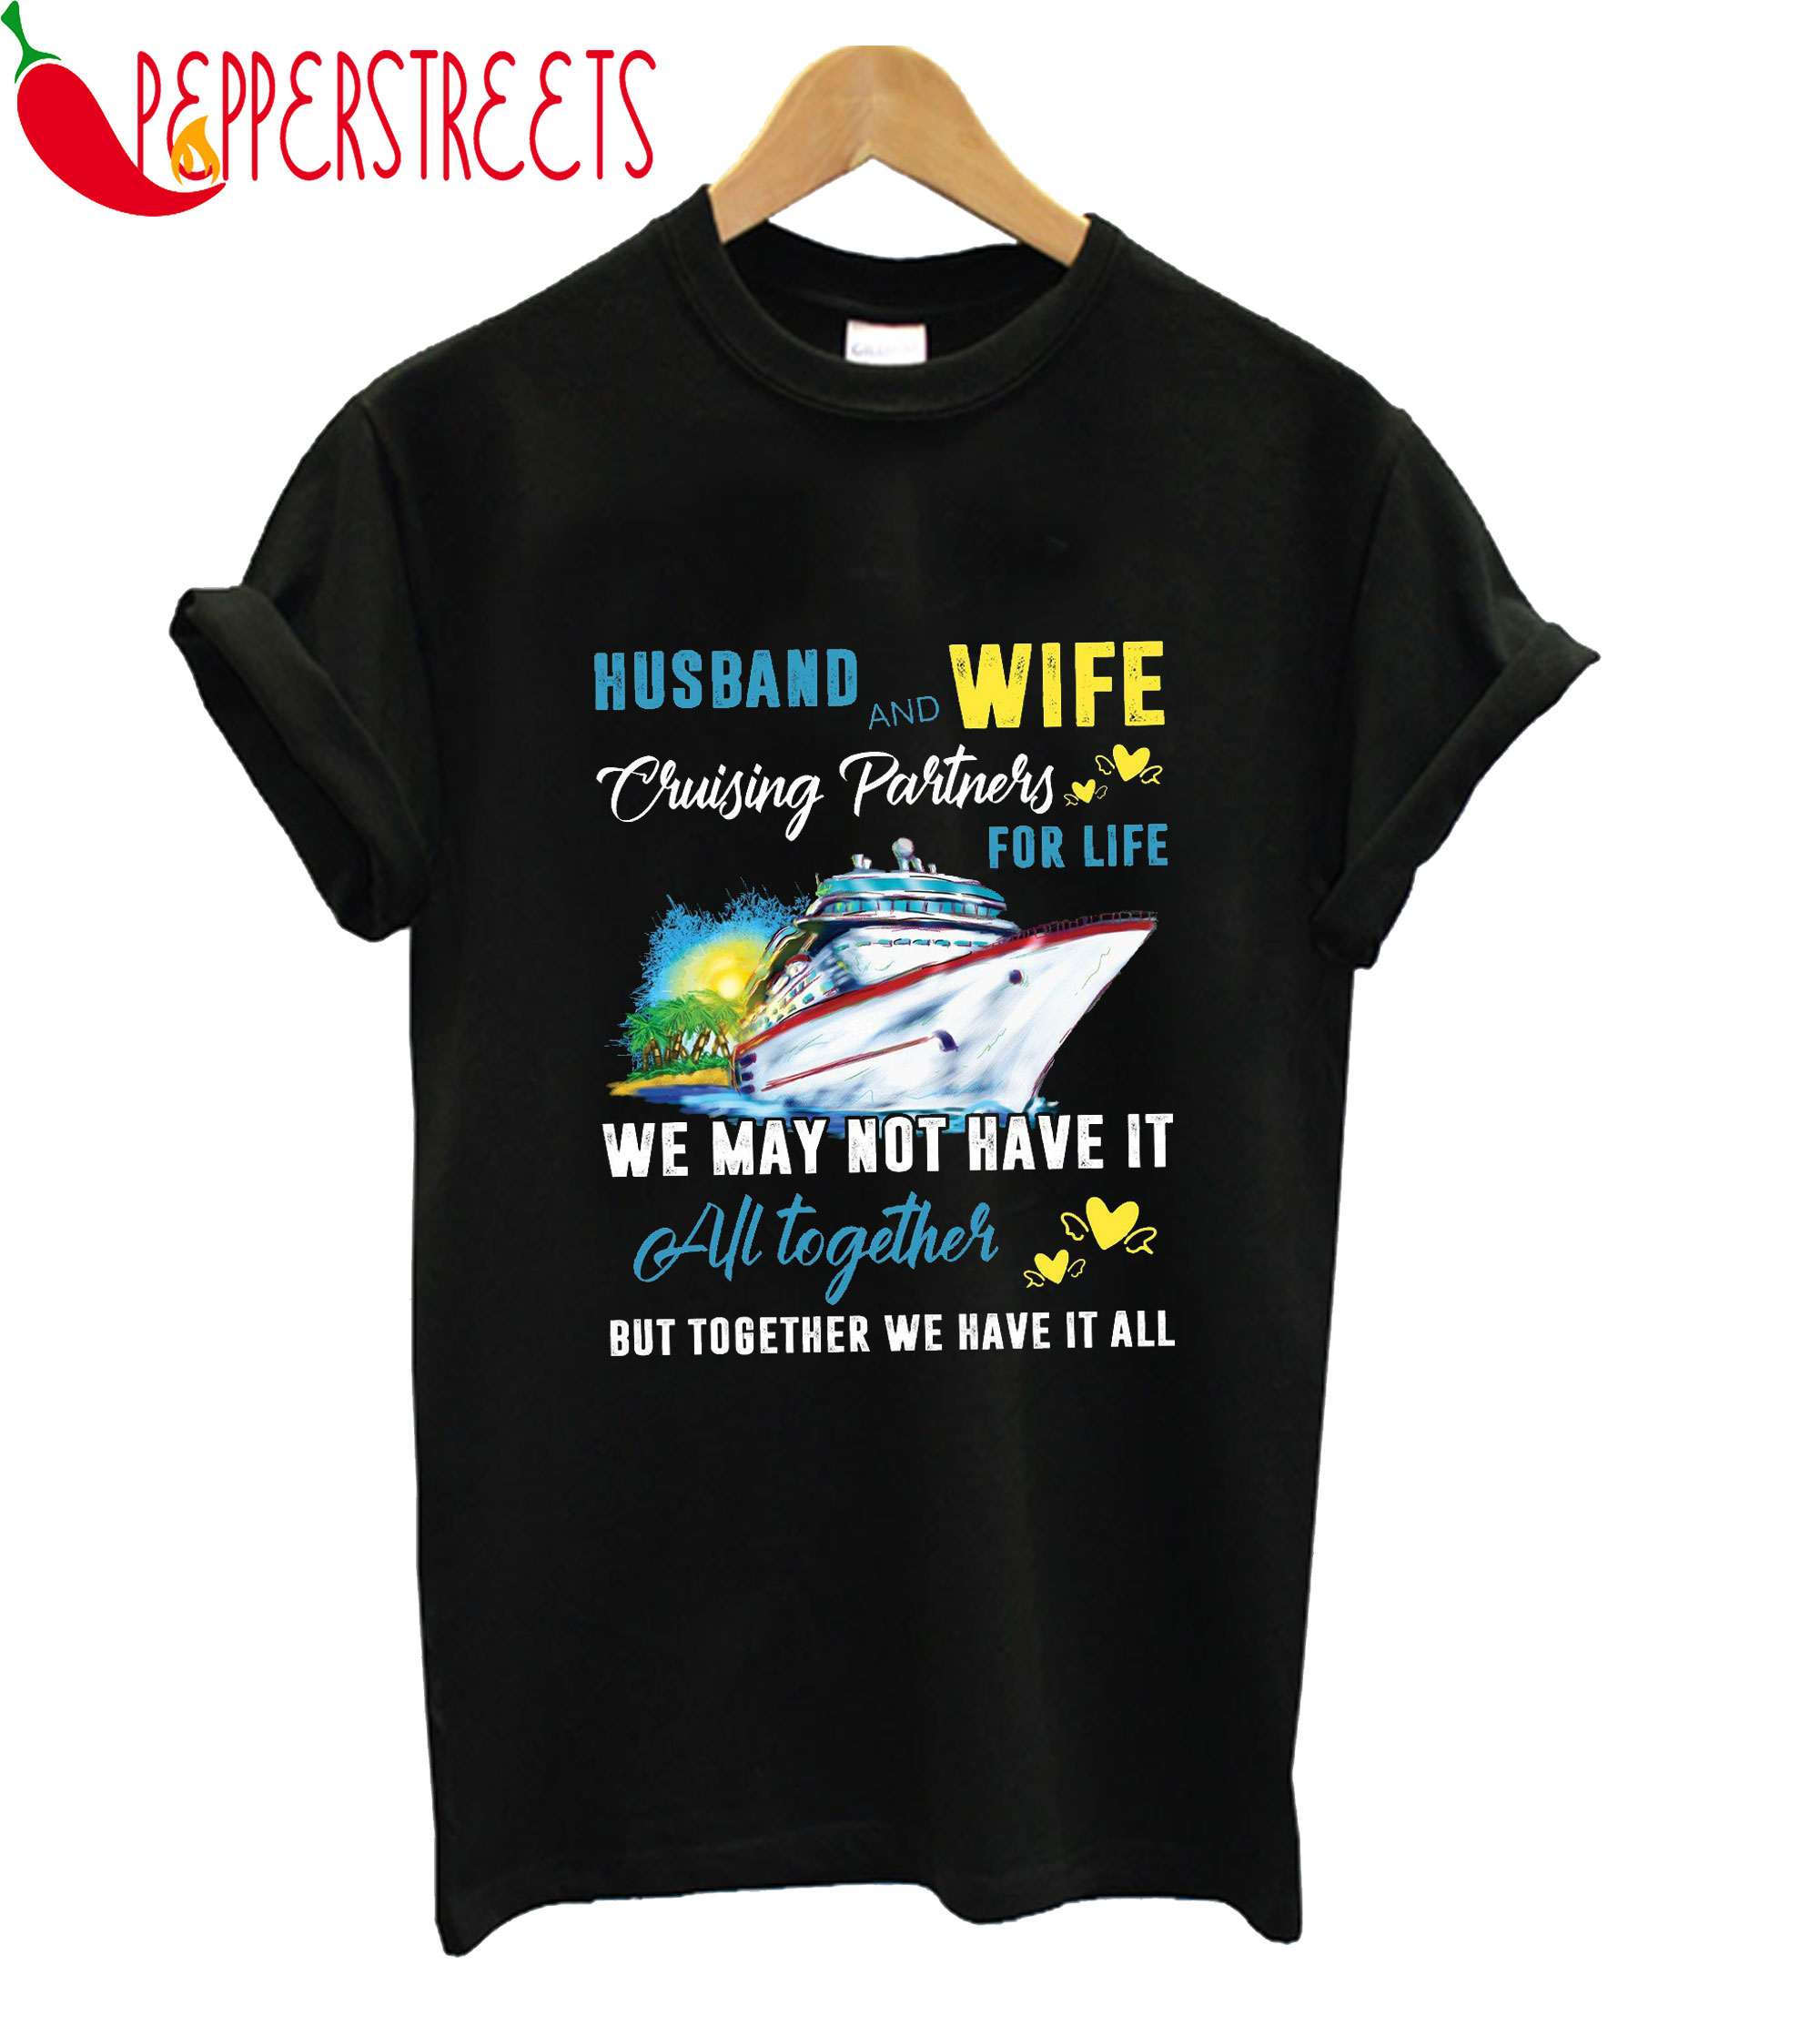 Husband And Wife Cruising Partners For Life All Together T-Shirt